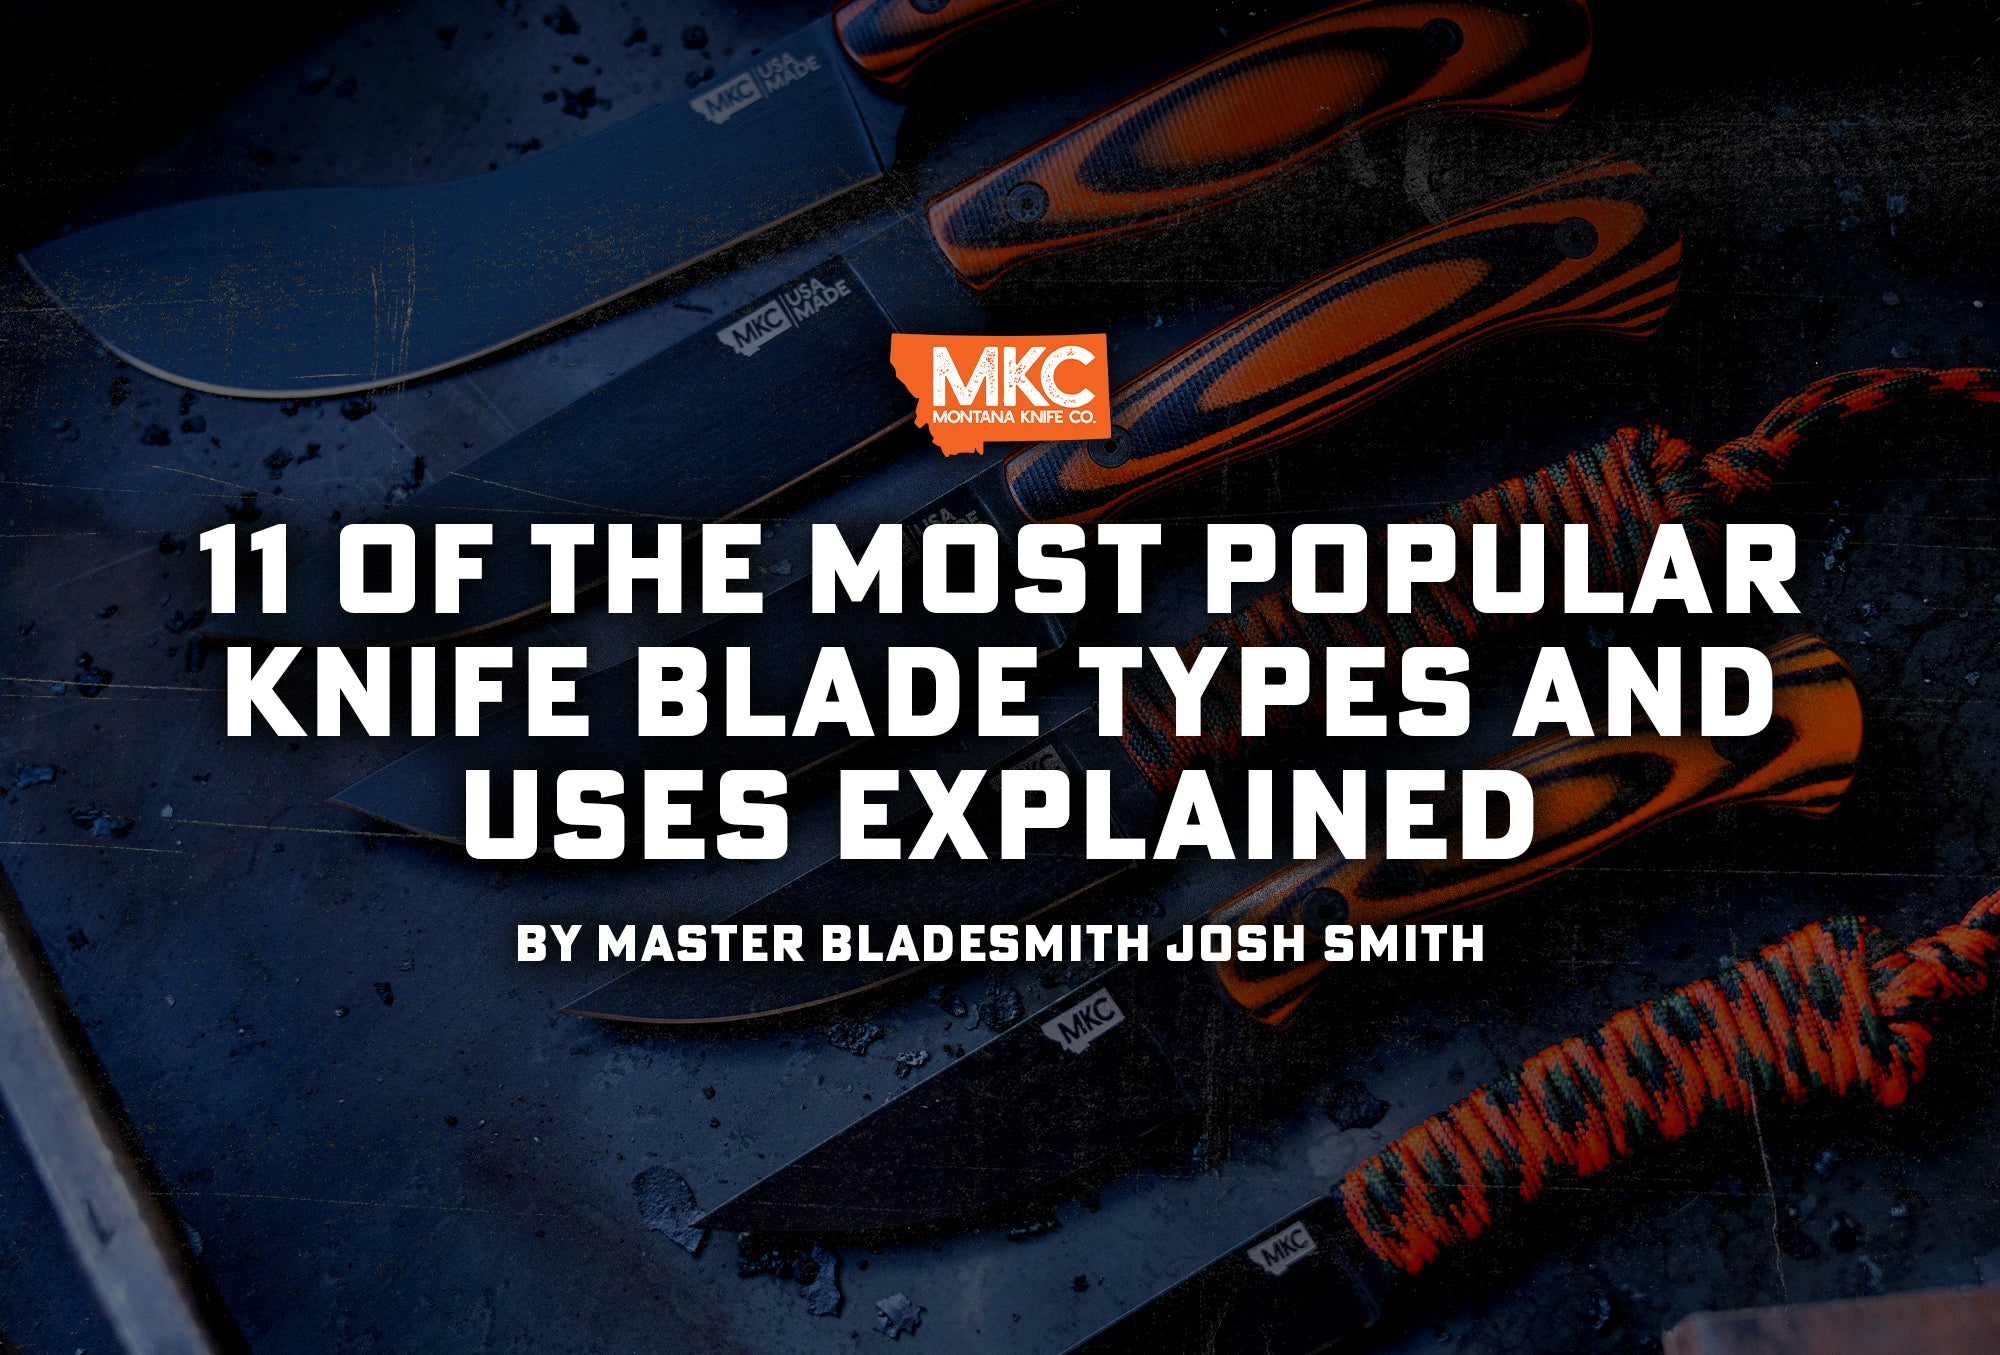 Knife descriptions and codes with statistics from the blade sharpness